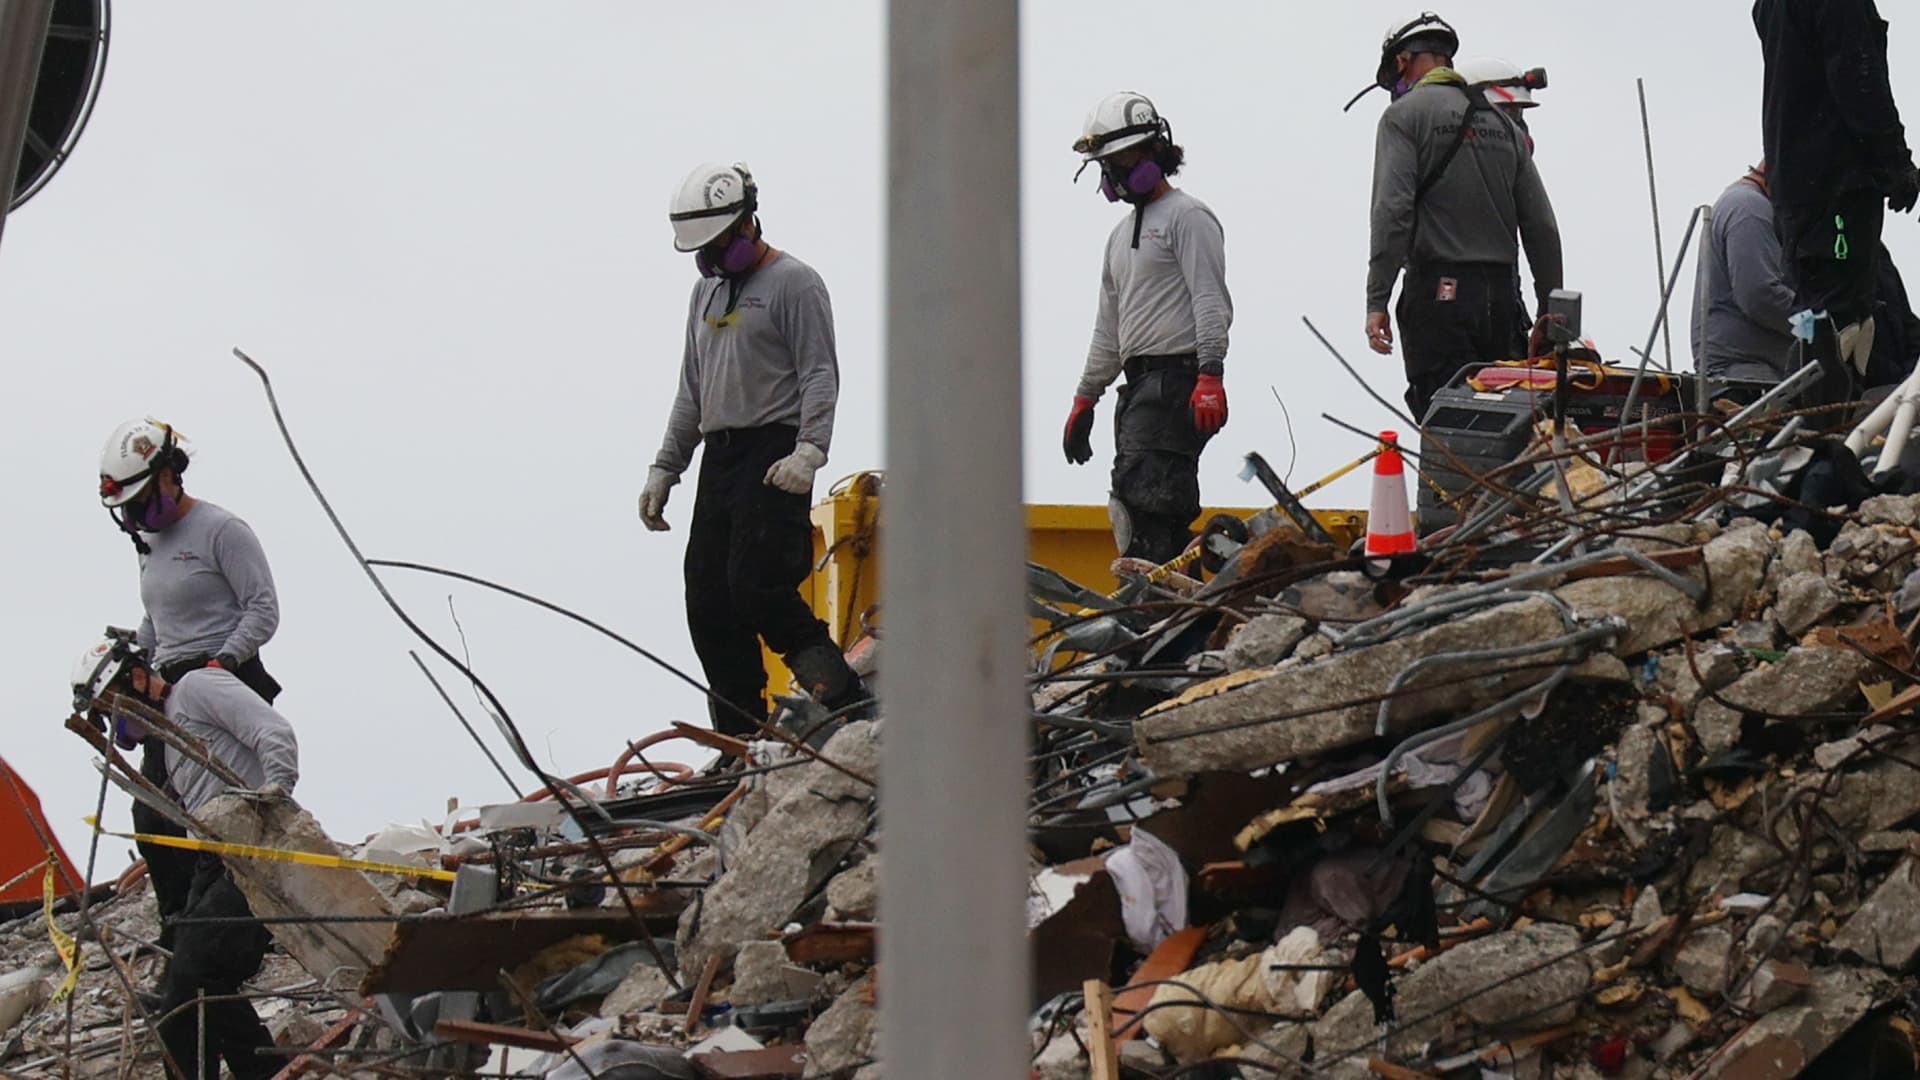 Search and Rescue teams look for possible survivors and to recover remains in the partially collapsed 12-story Champlain Towers South condo building on June 30, 2021 in Surfside, Florida.